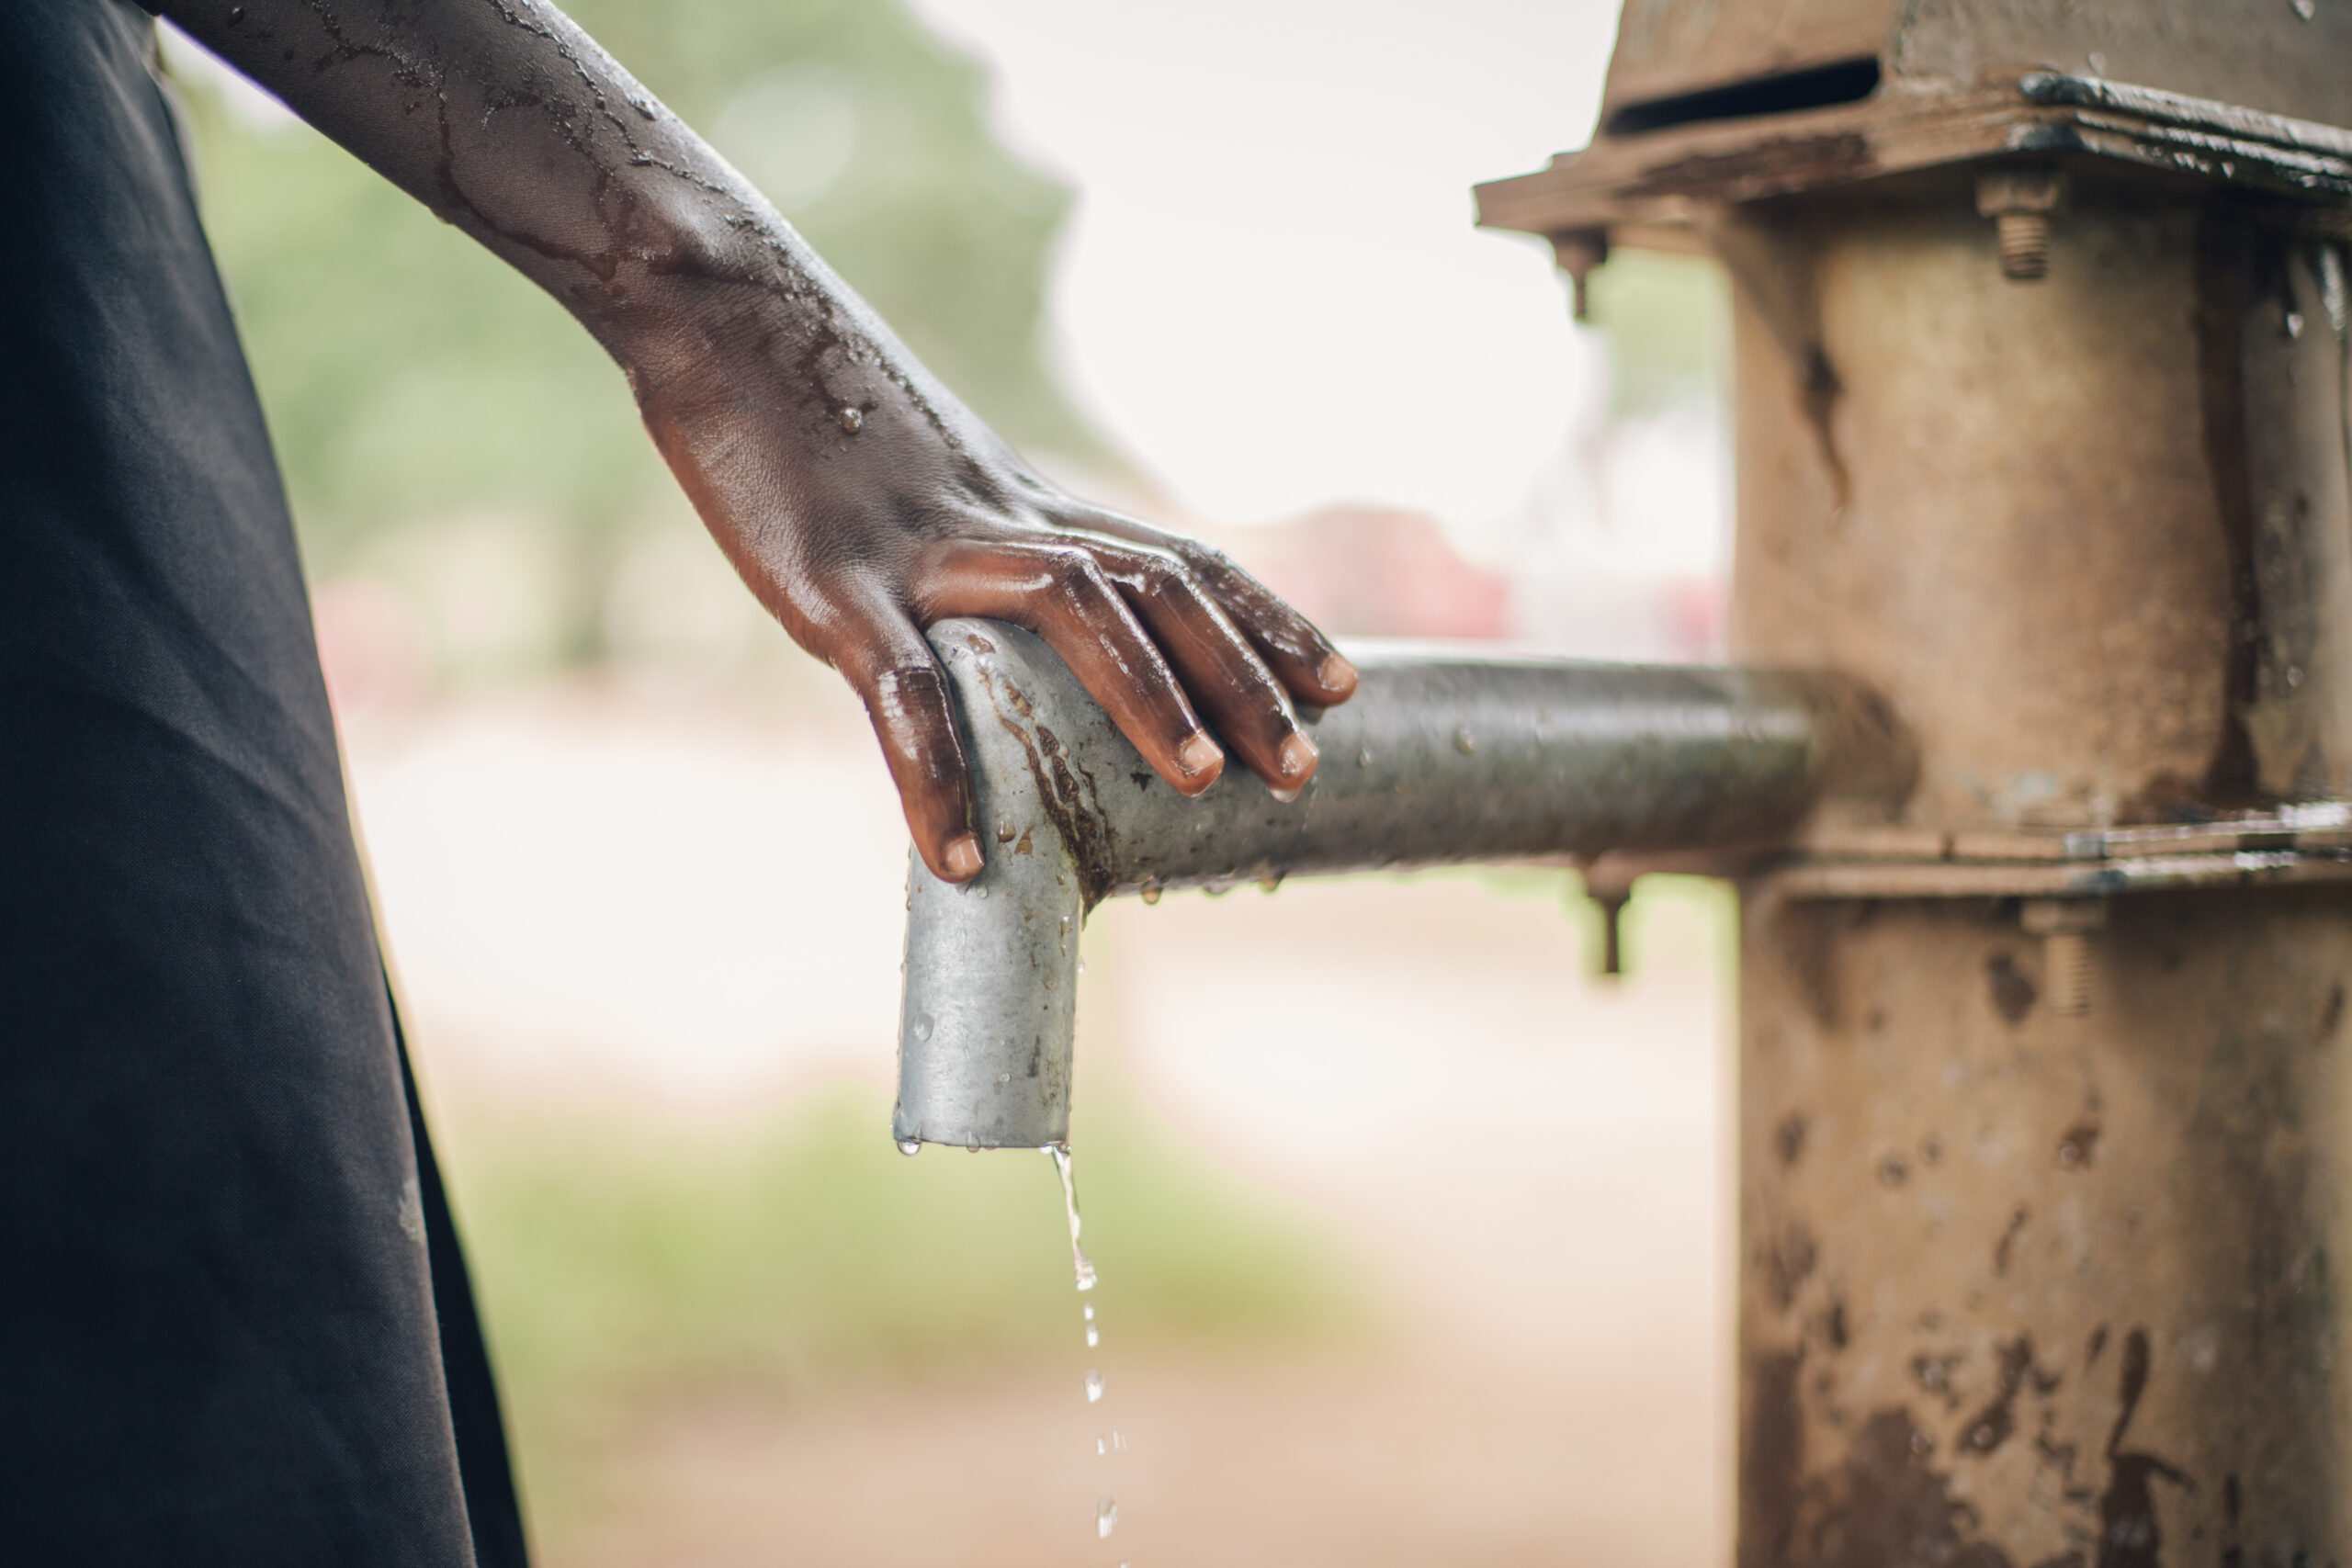 African child places hand on spout of water fountain pump preparing to carry water.